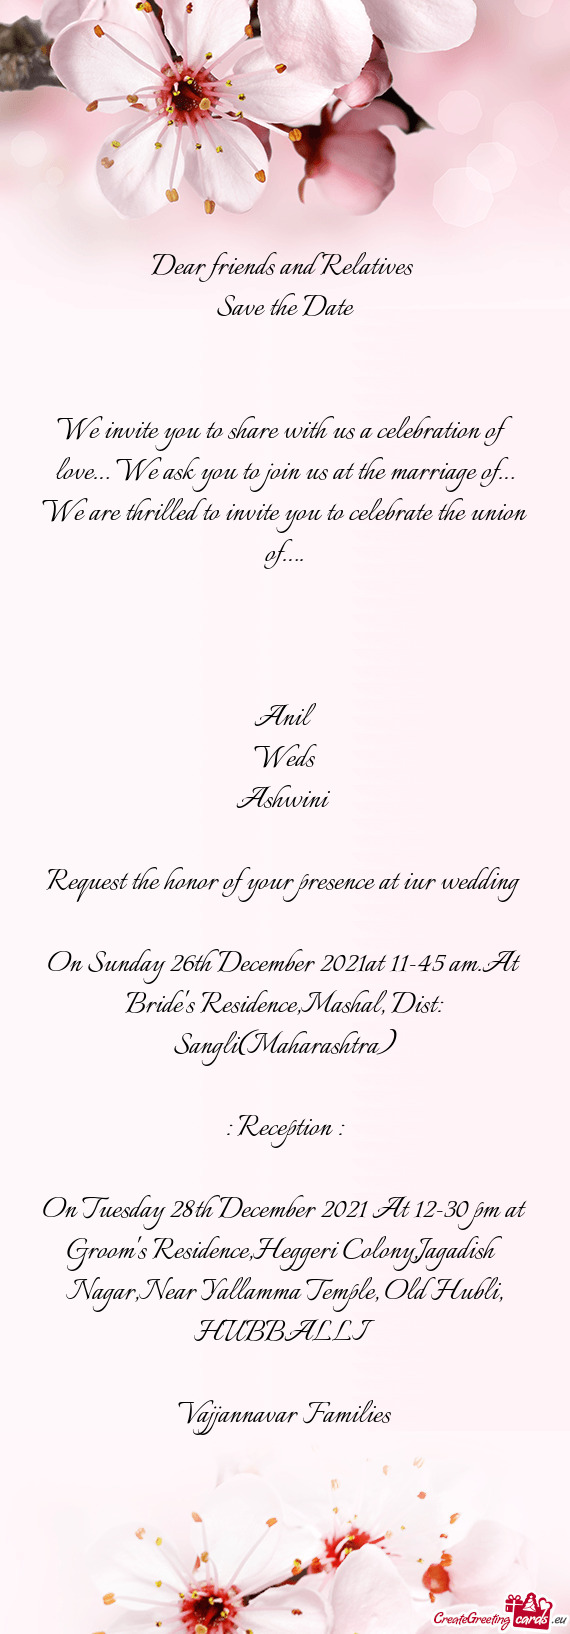 Request the honor of your presence at iur wedding